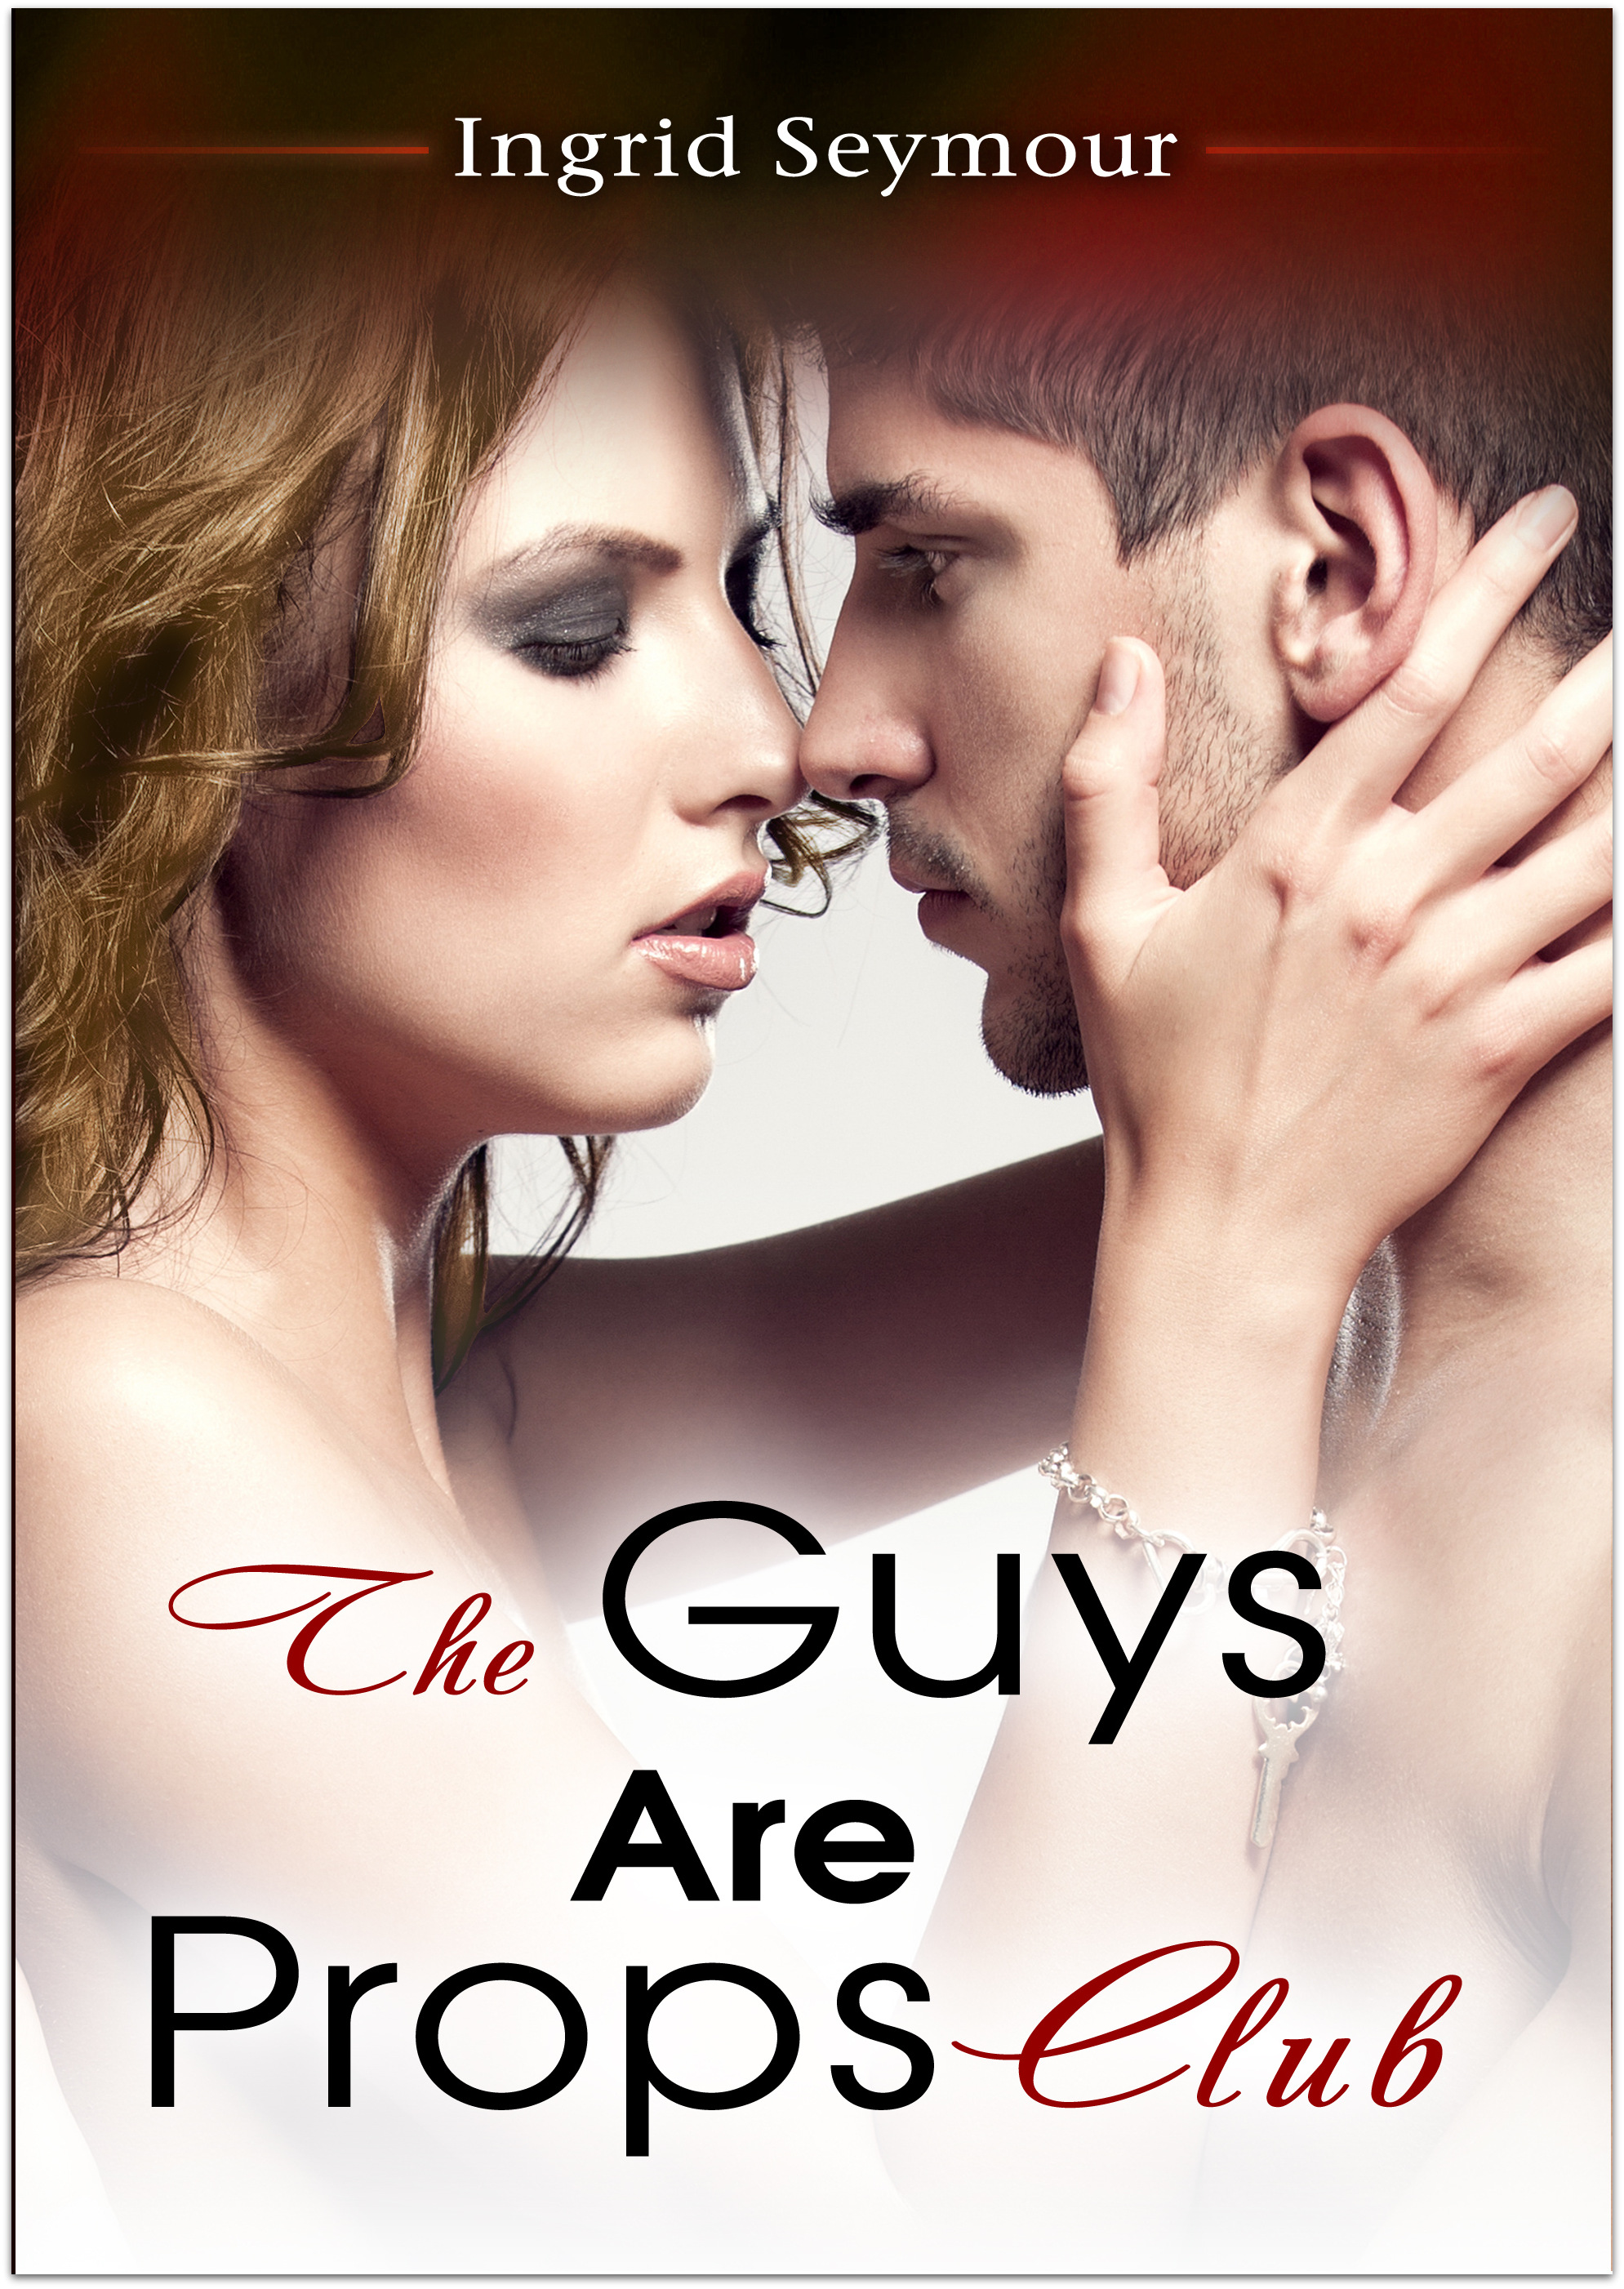 The Guys Are Props Club by Ingrid Seymour